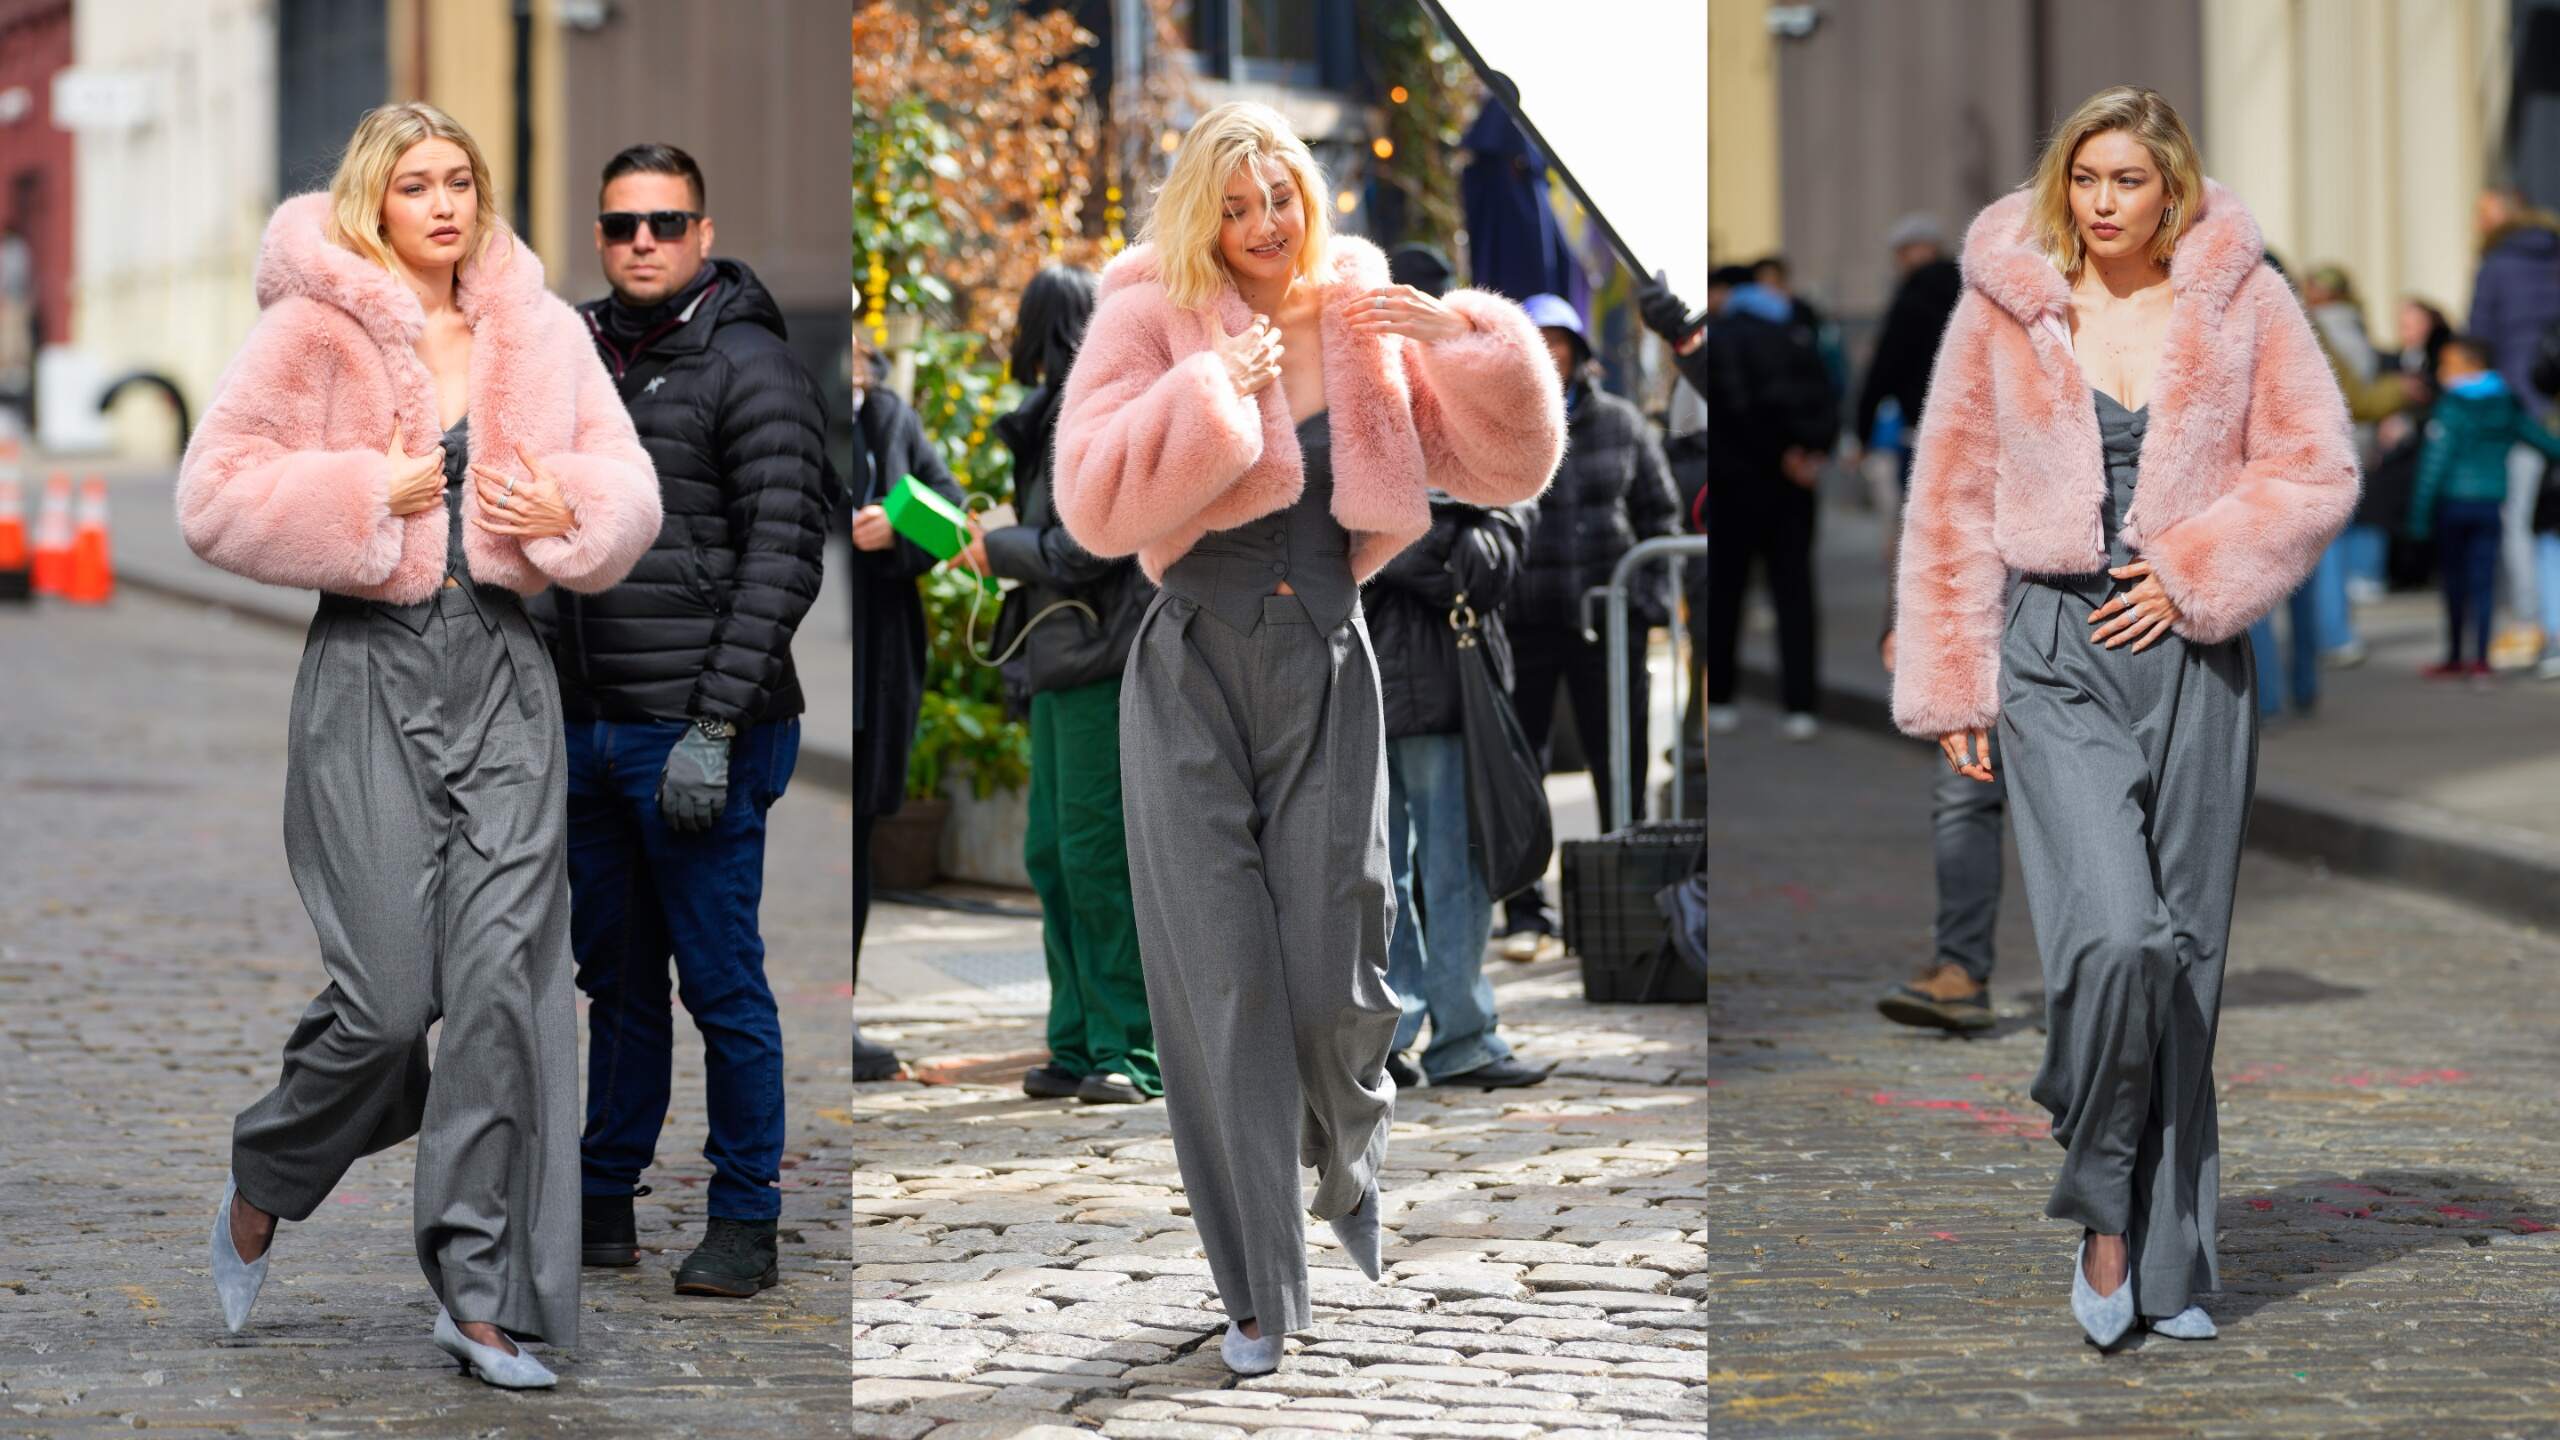 Model Gigi Hadid wears a pink faux fur coat and walks on an NYC street for a photoshoot